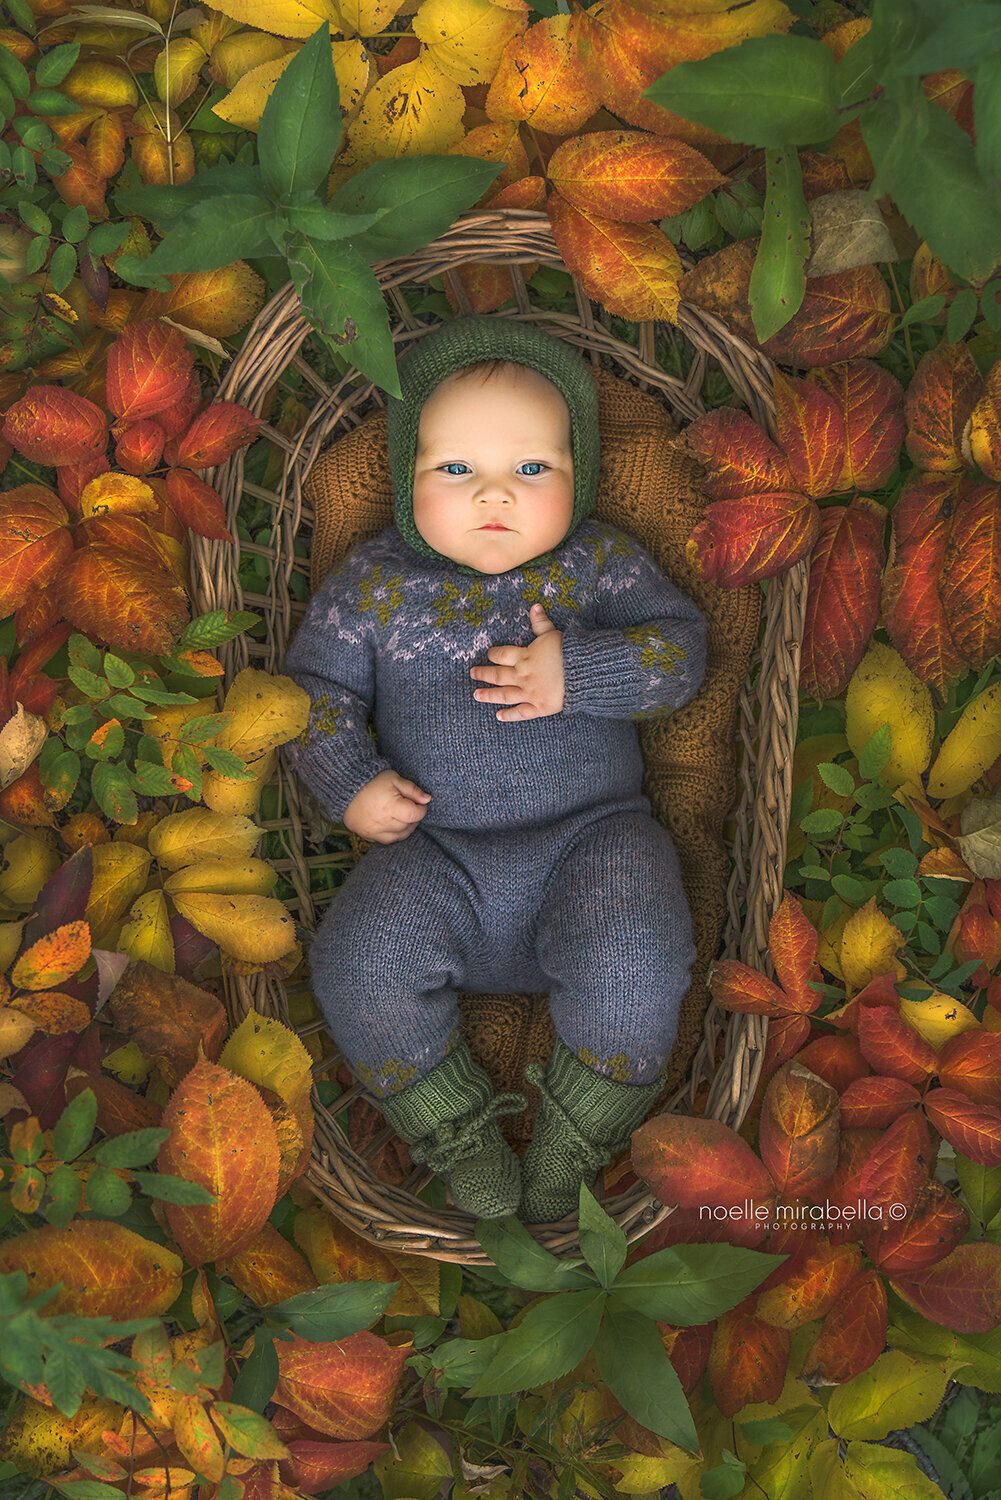 Baby outdoors laying in wicker basket in autumn leaves.